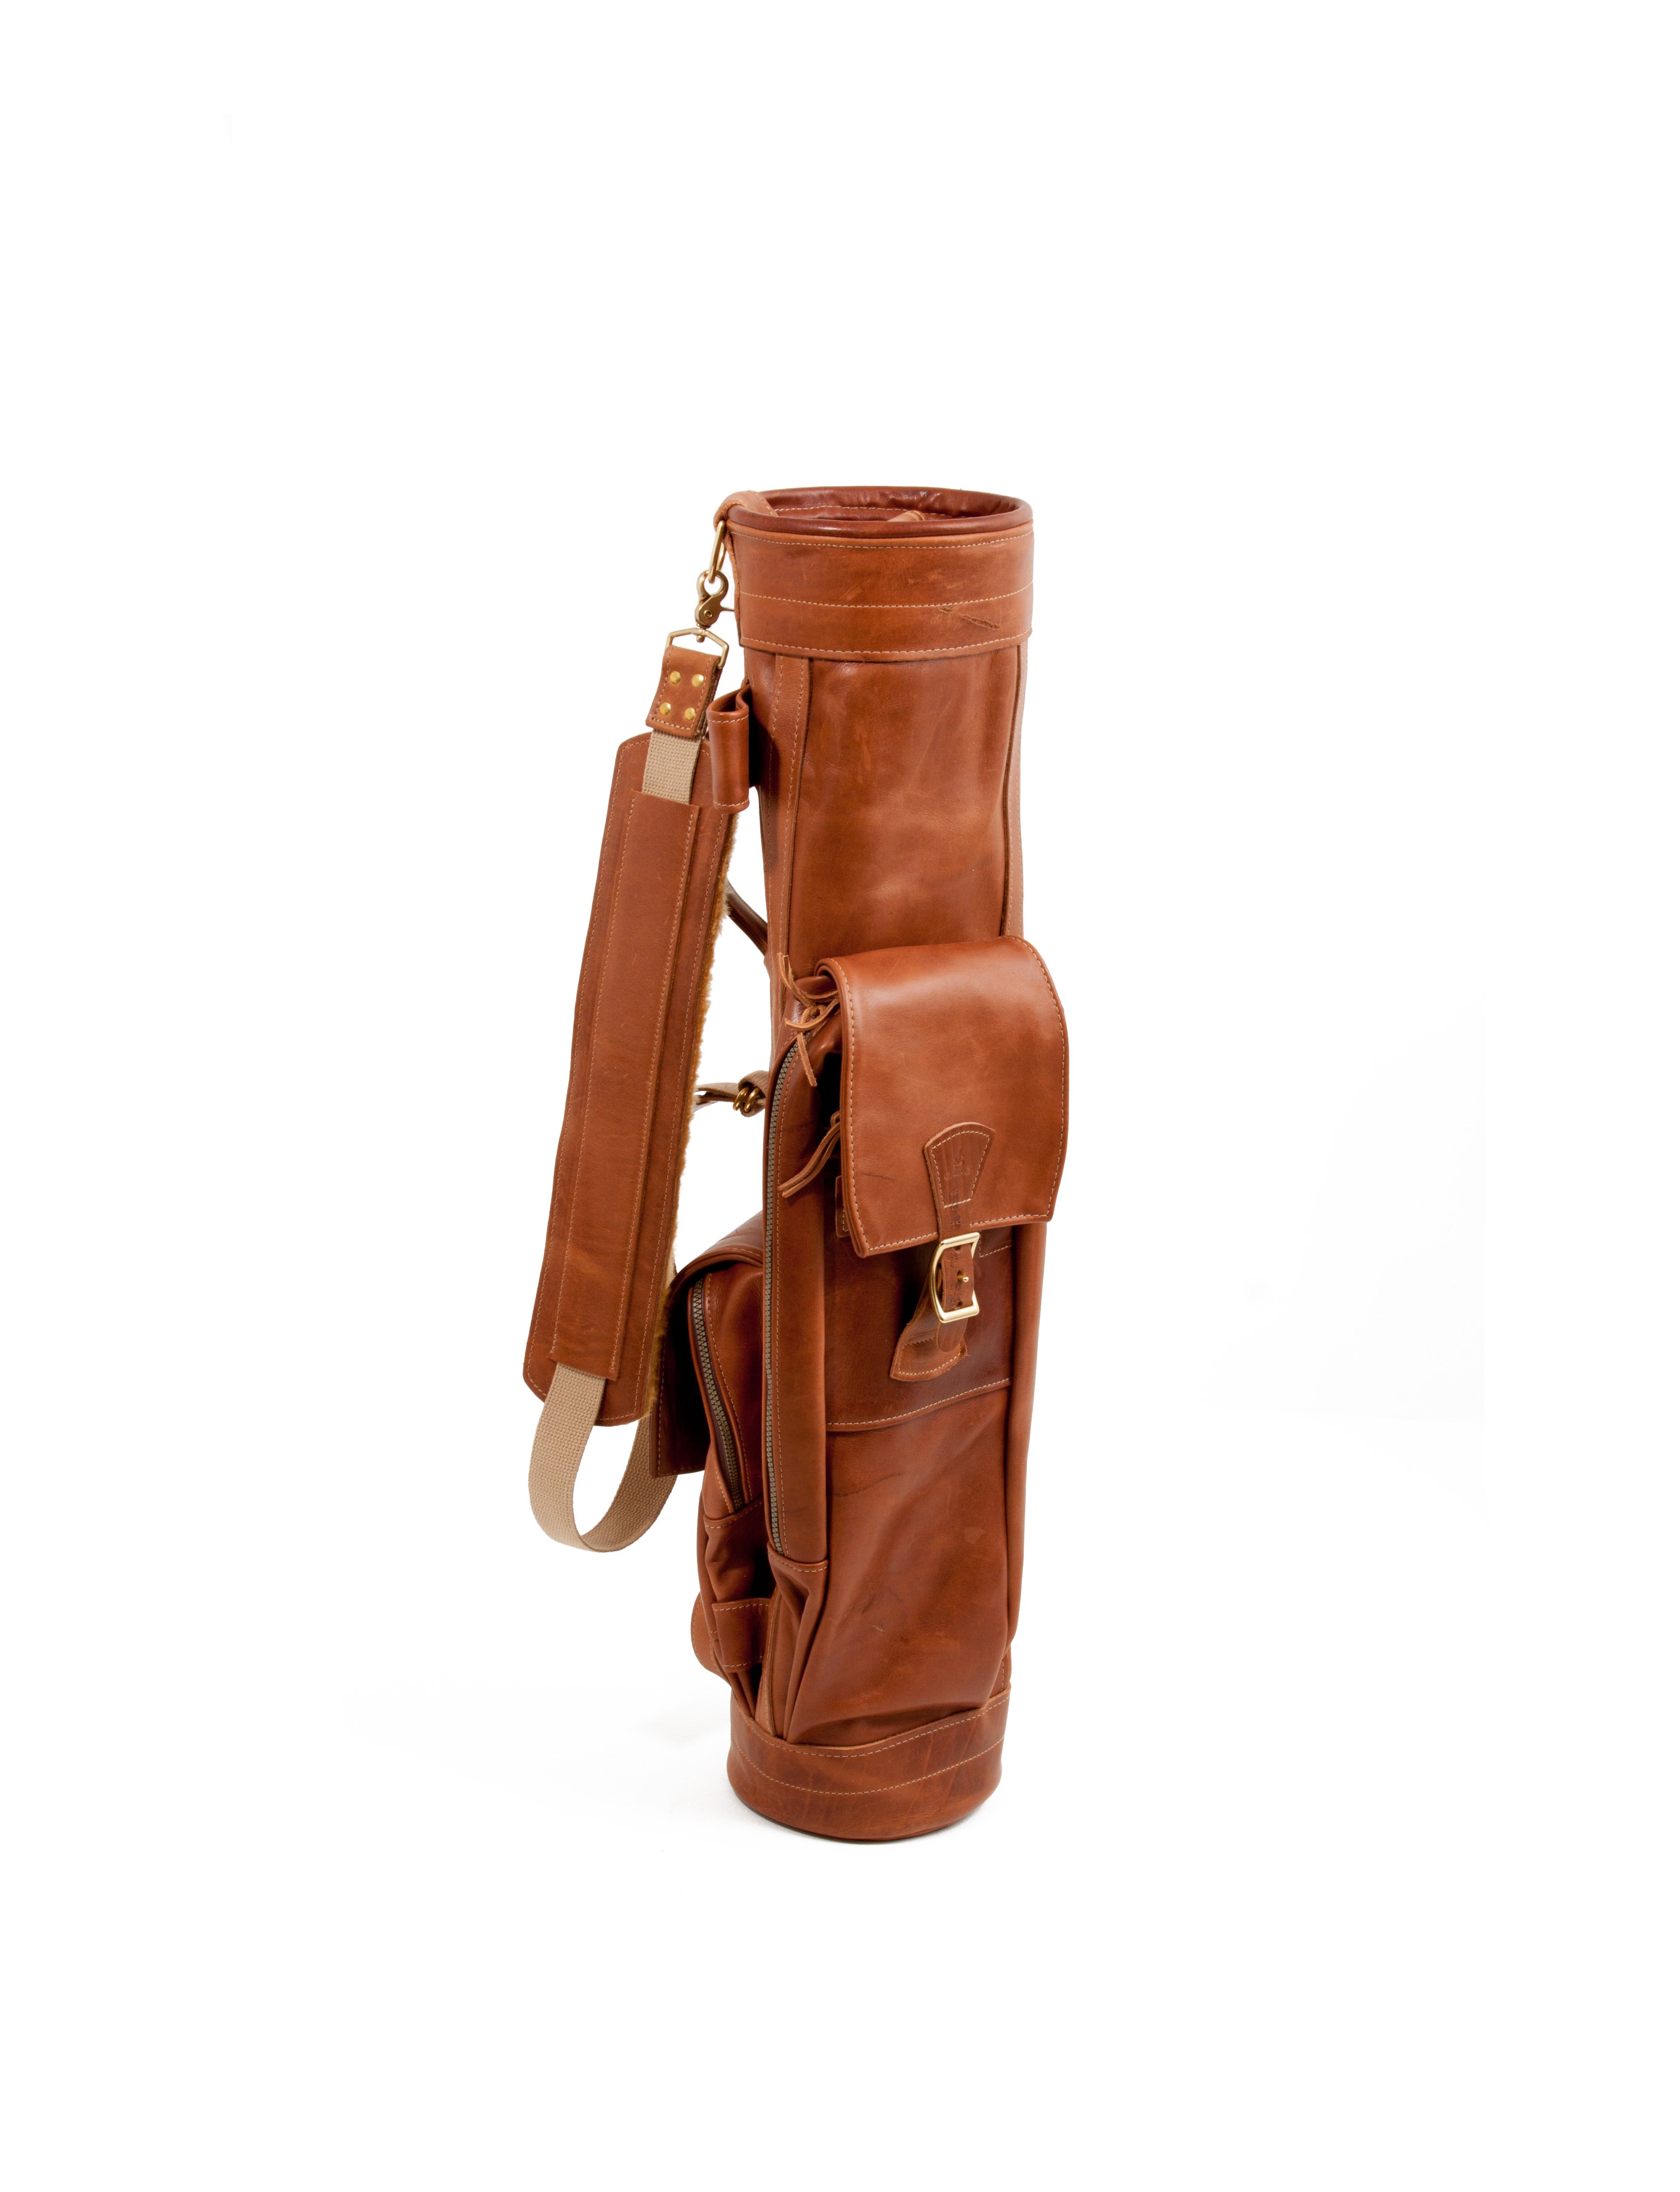 8" Leather Golf Bags